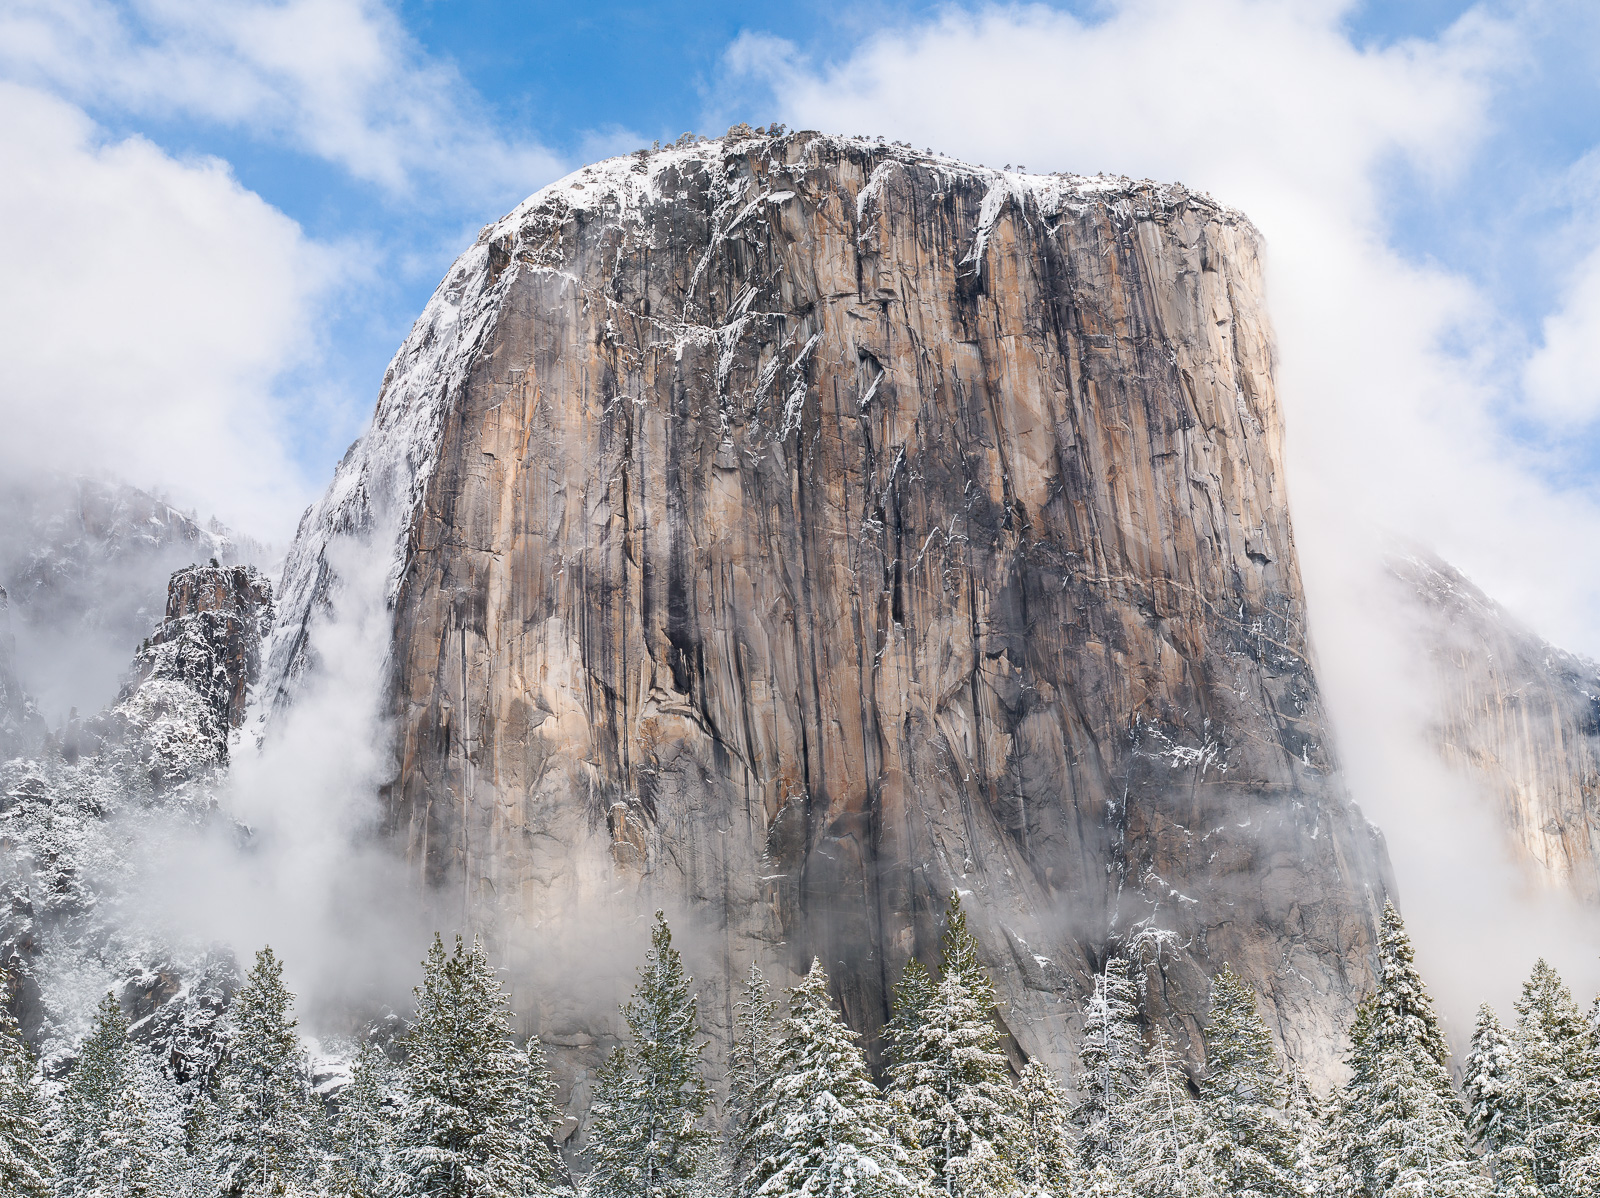 El Capitan sheds snow from last nights storm.   What a grand sight indeed!